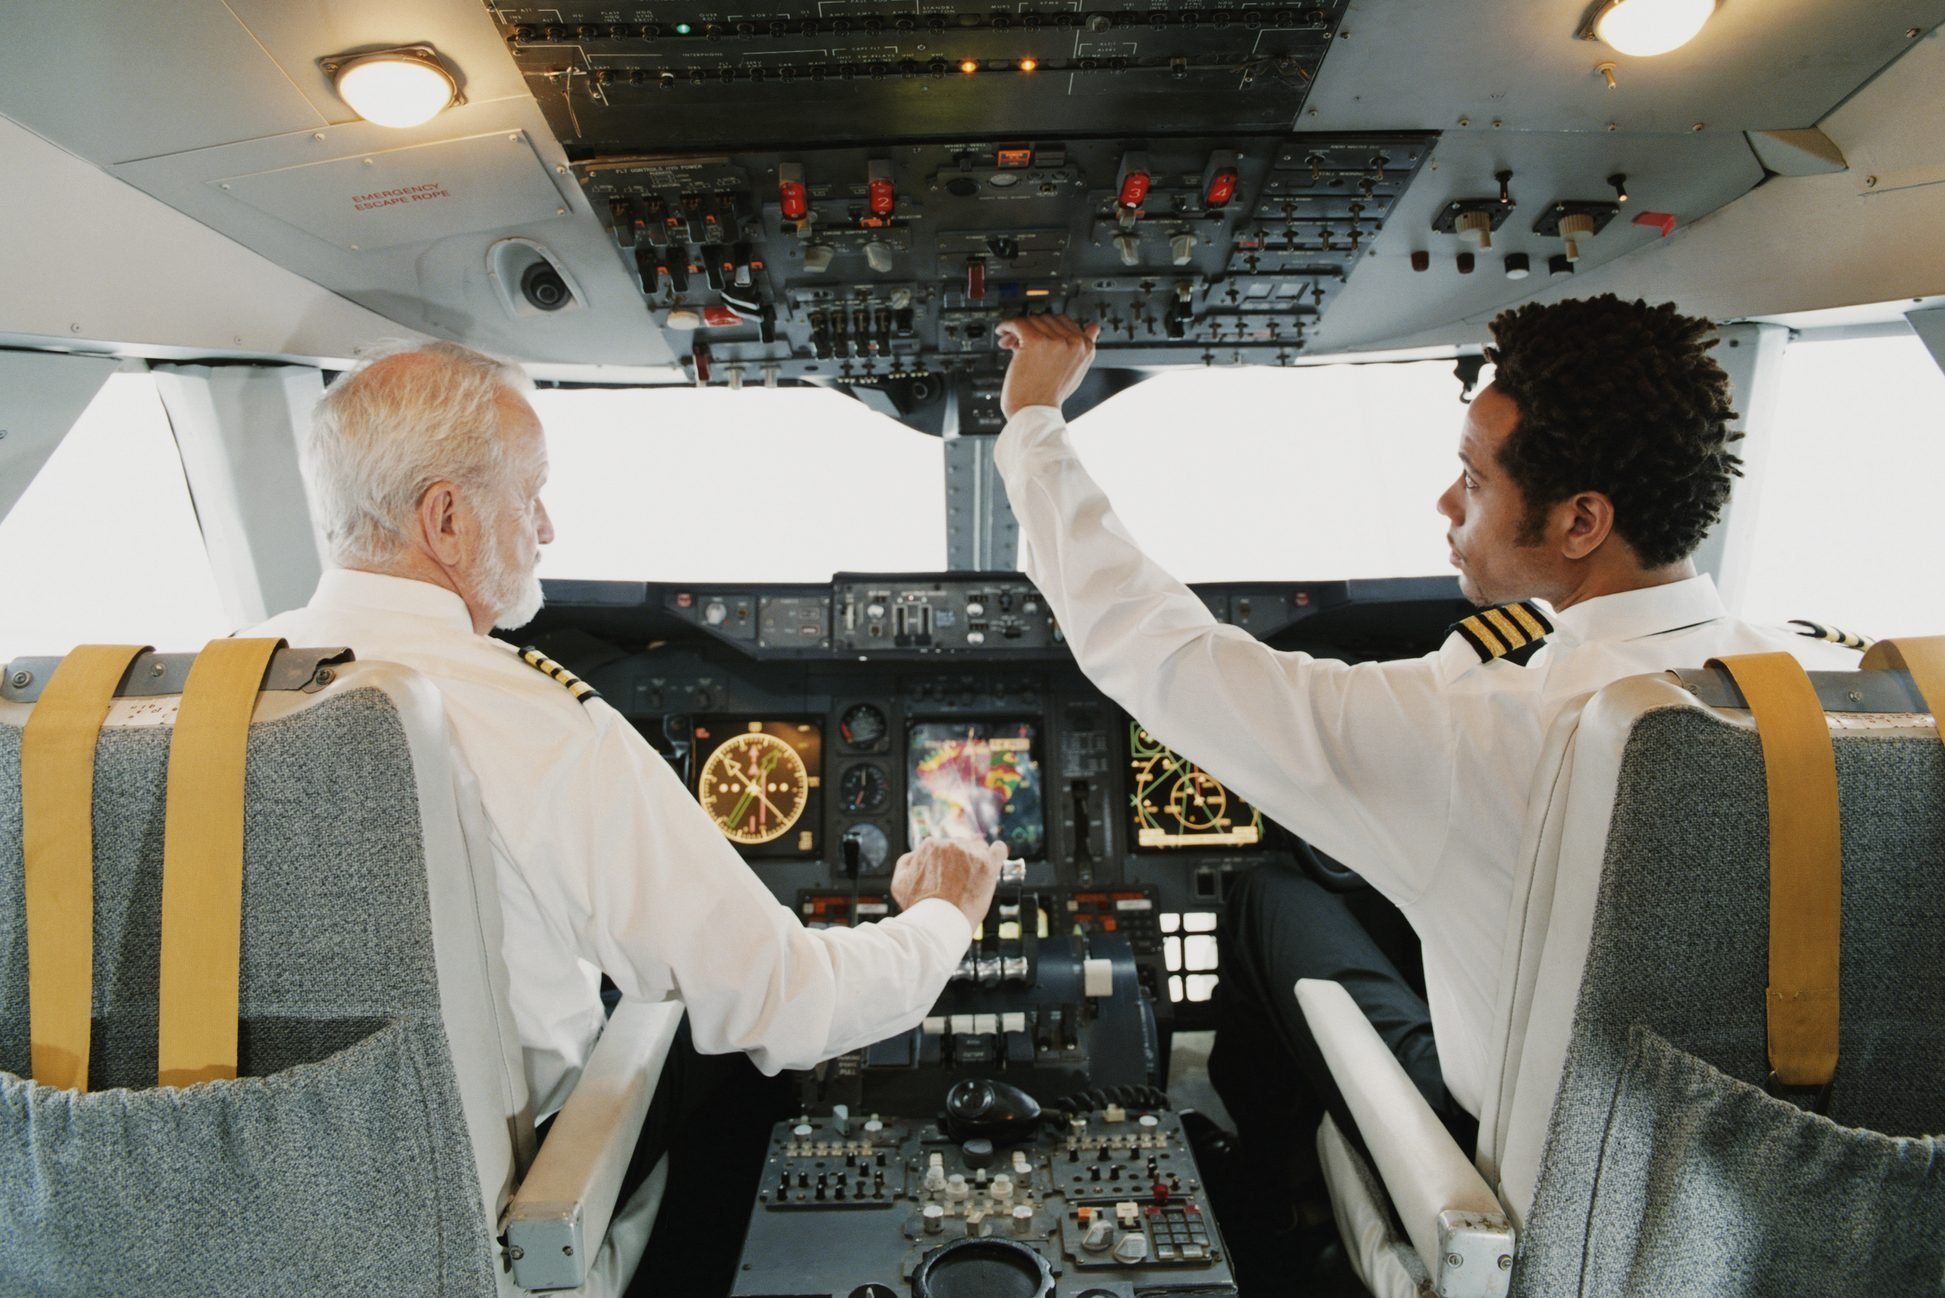 Most airline pilots are men. Why aren't there more women in the